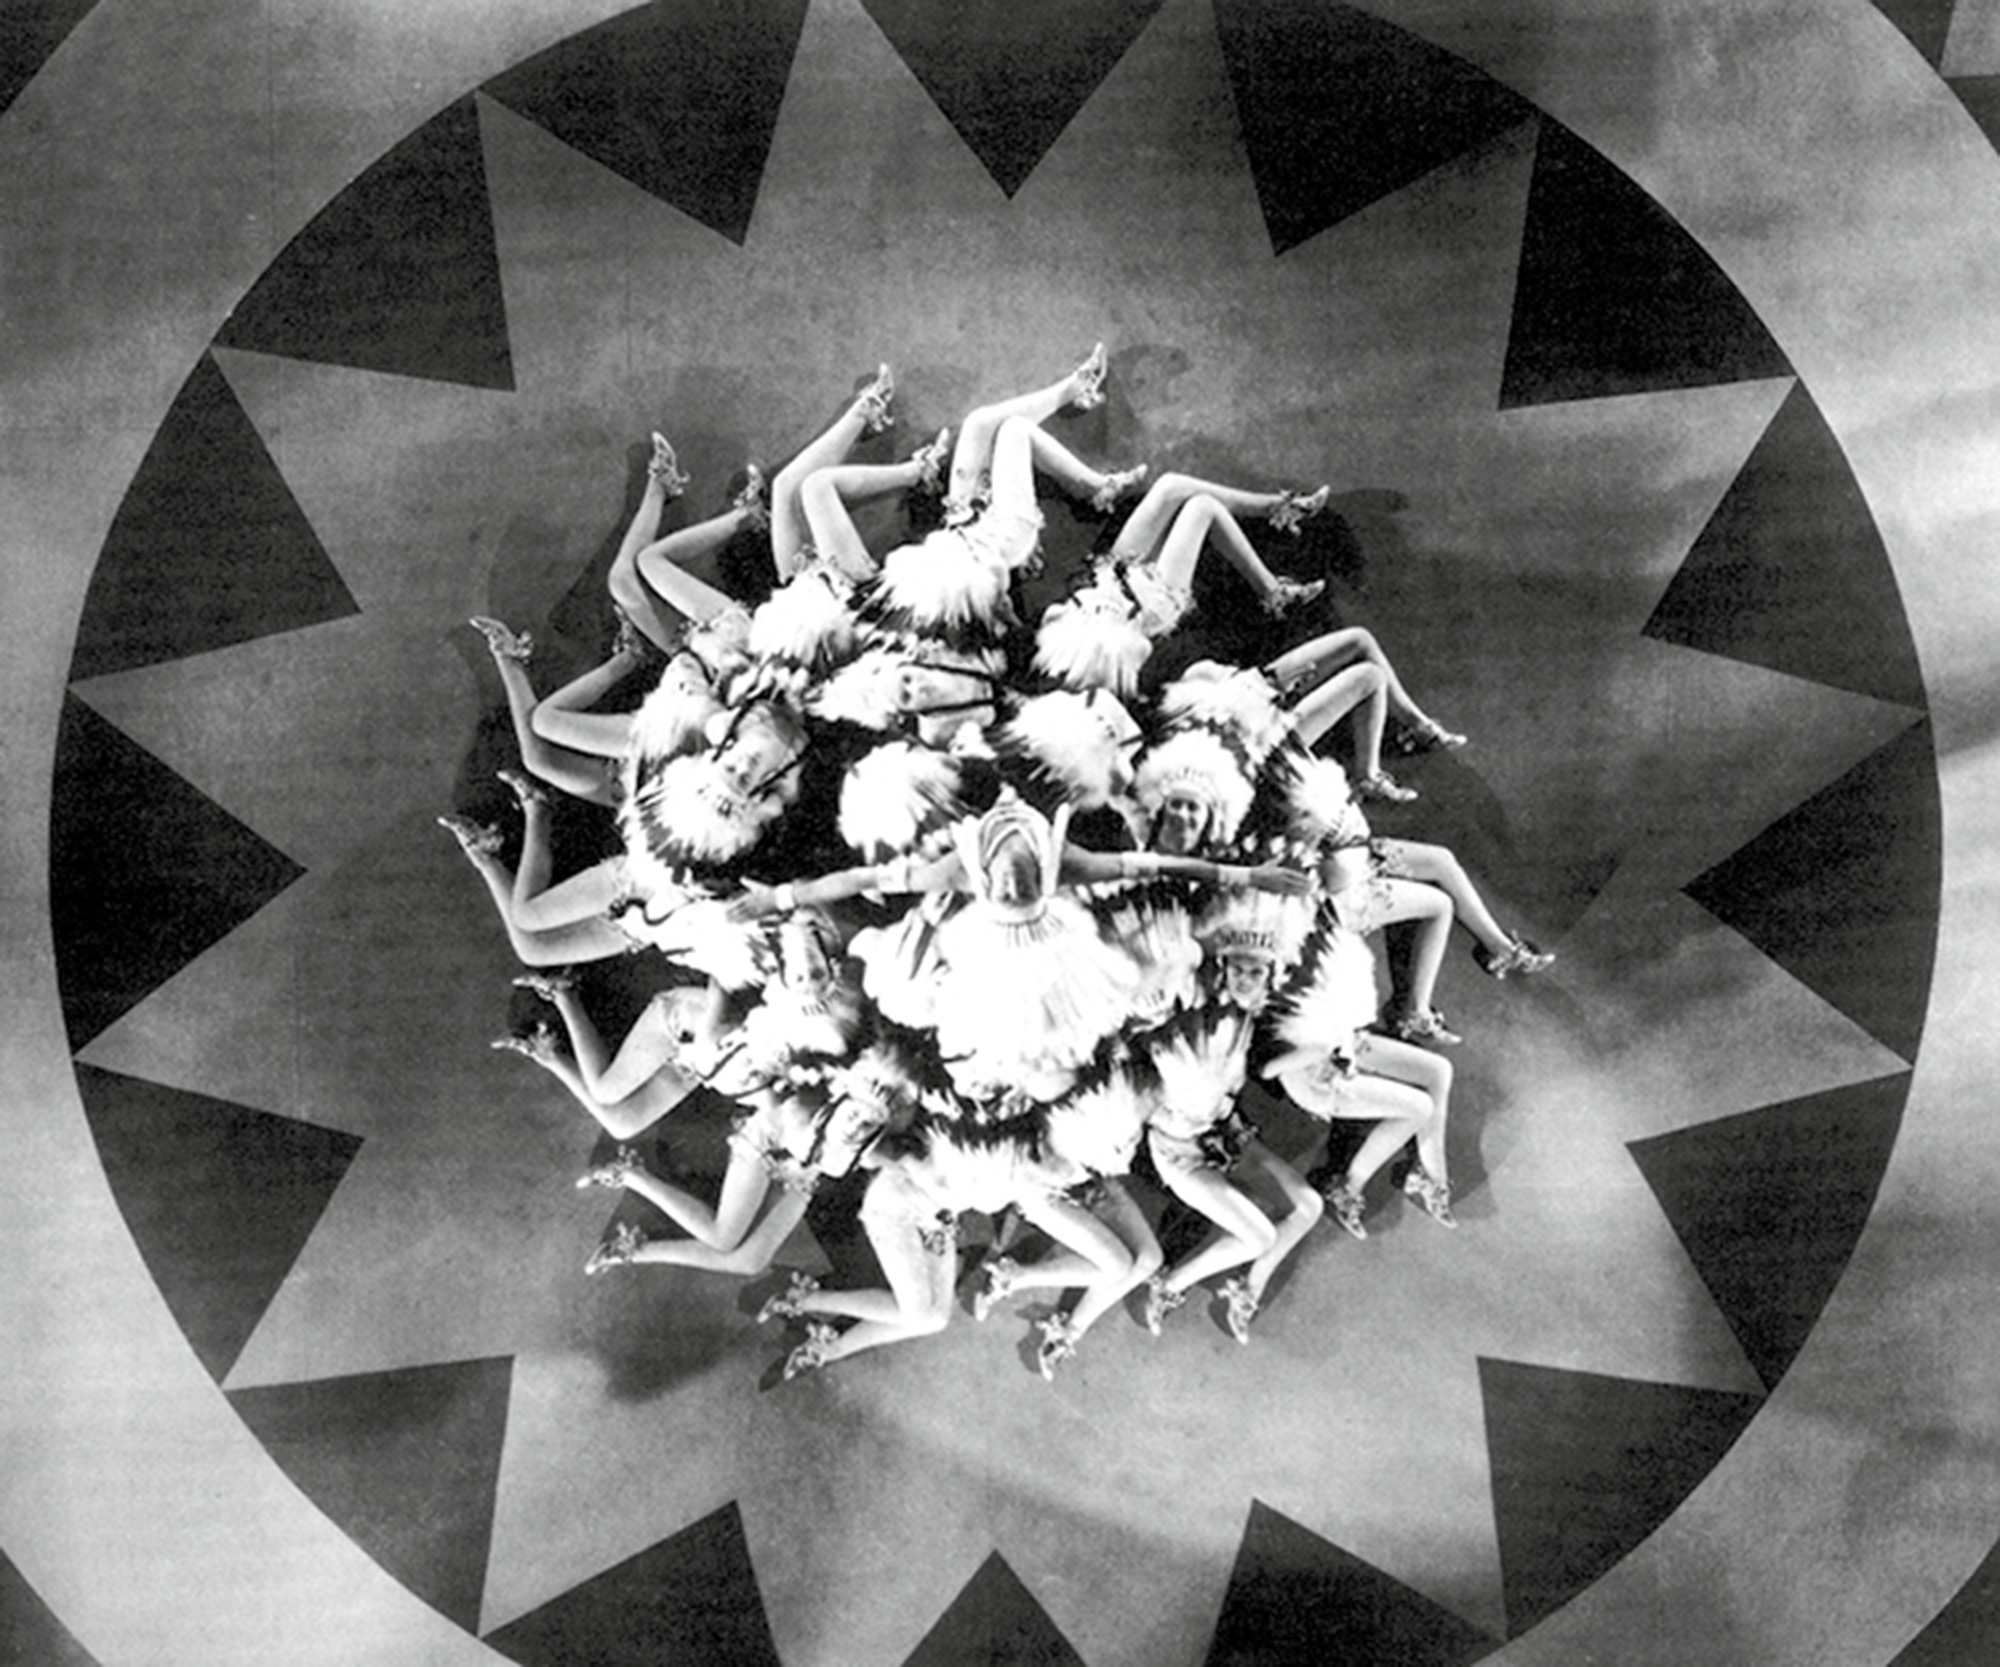 Scene from Whoopee! (1930), directed by Busby Berkeley.